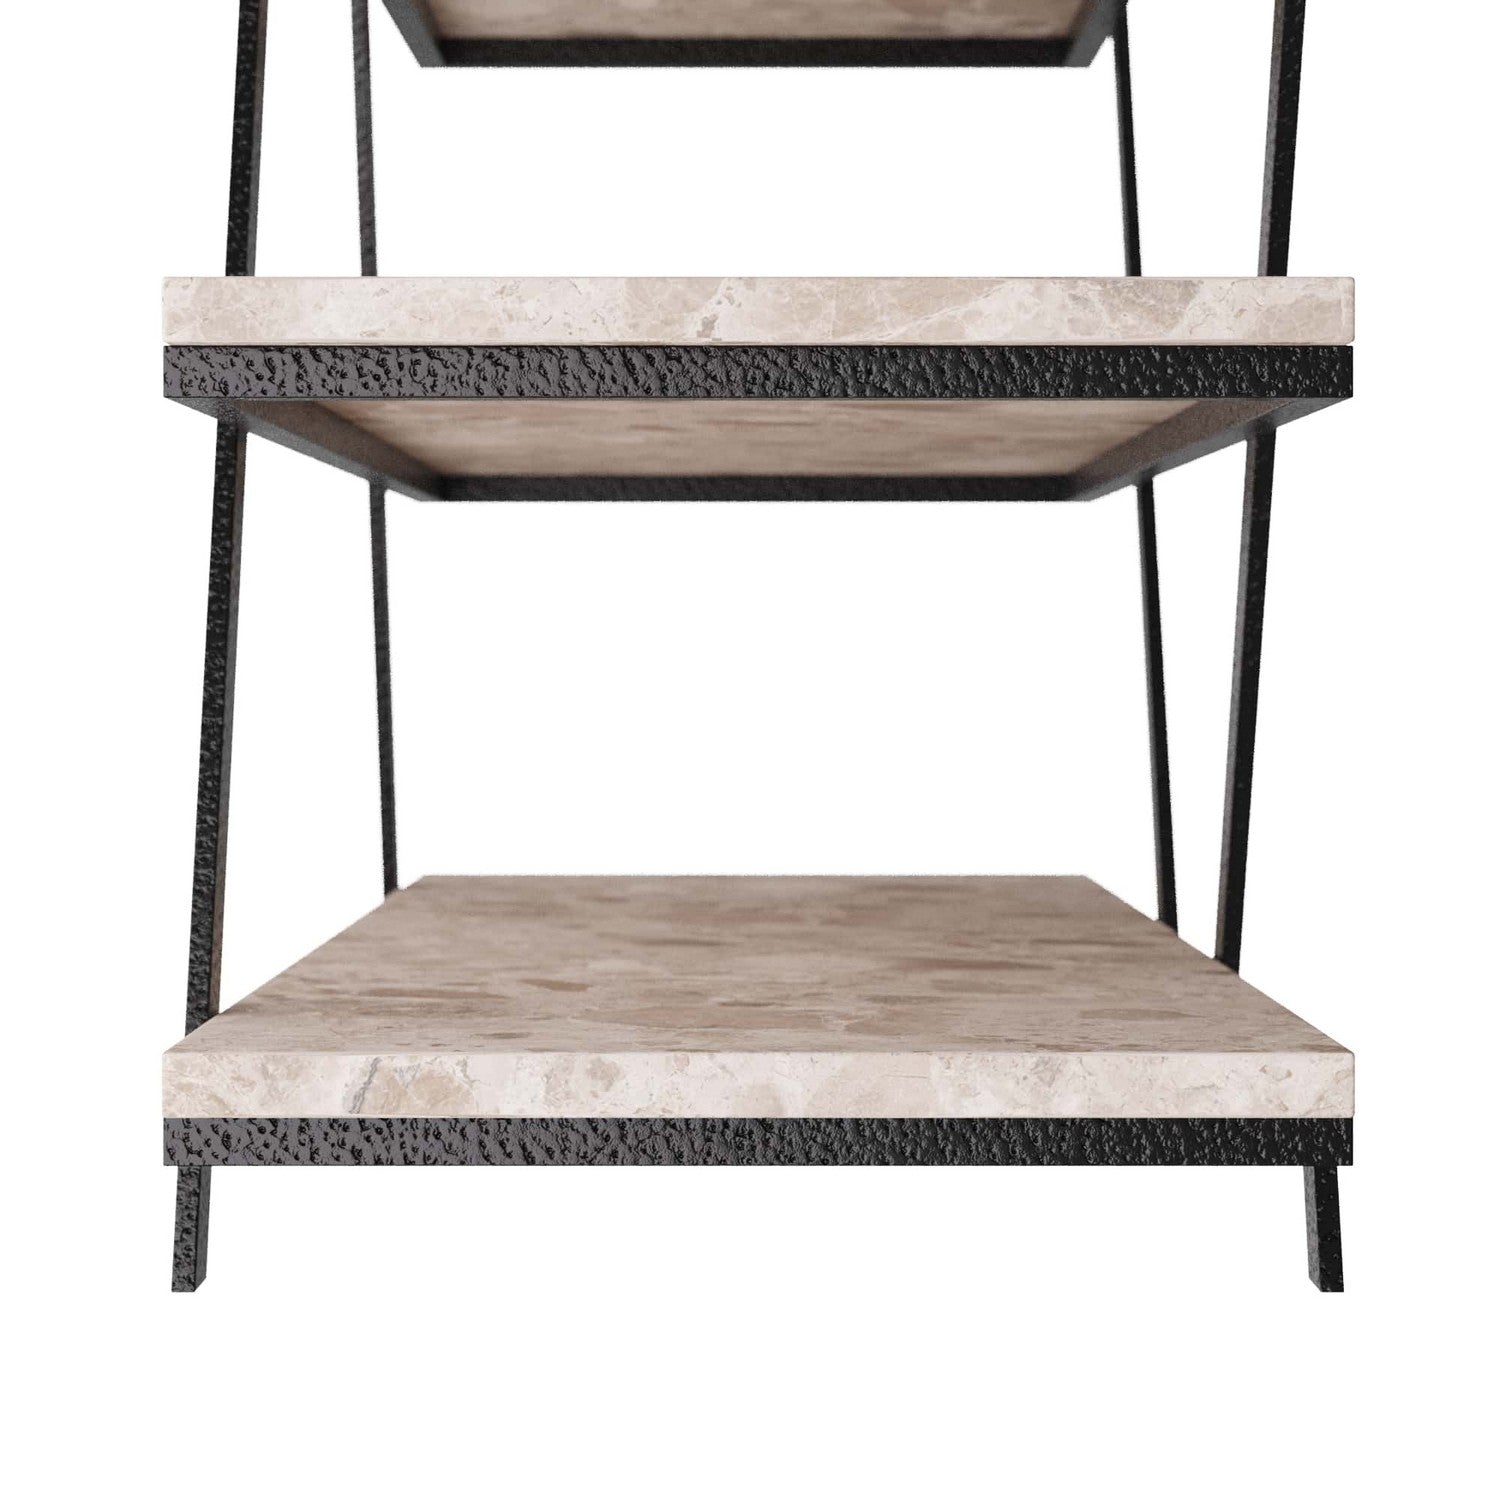 Etagere from the Tupelo collection in Capri finish